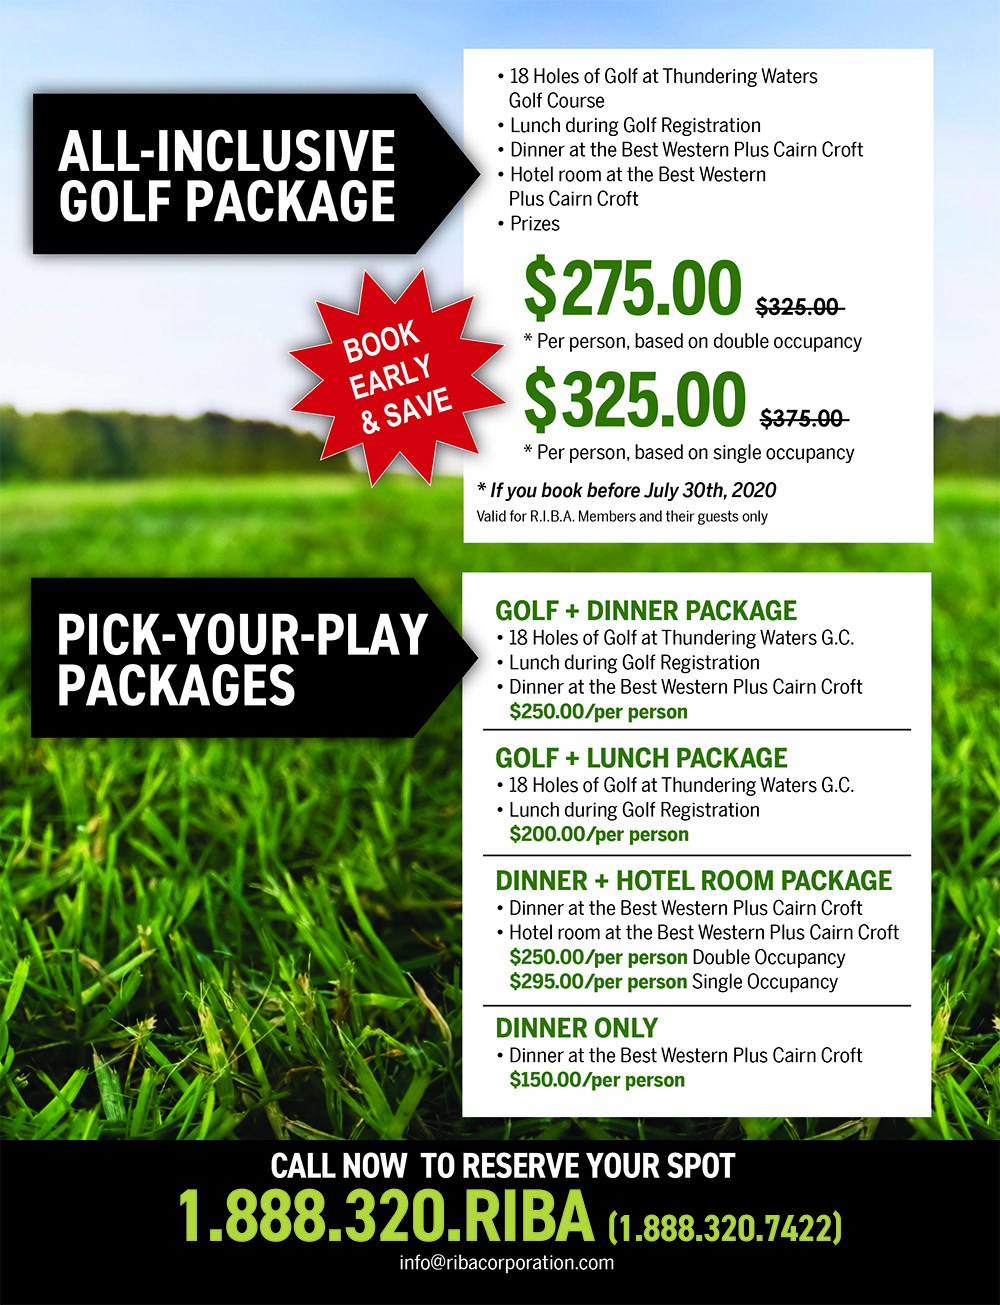 Golf Packages and pricing